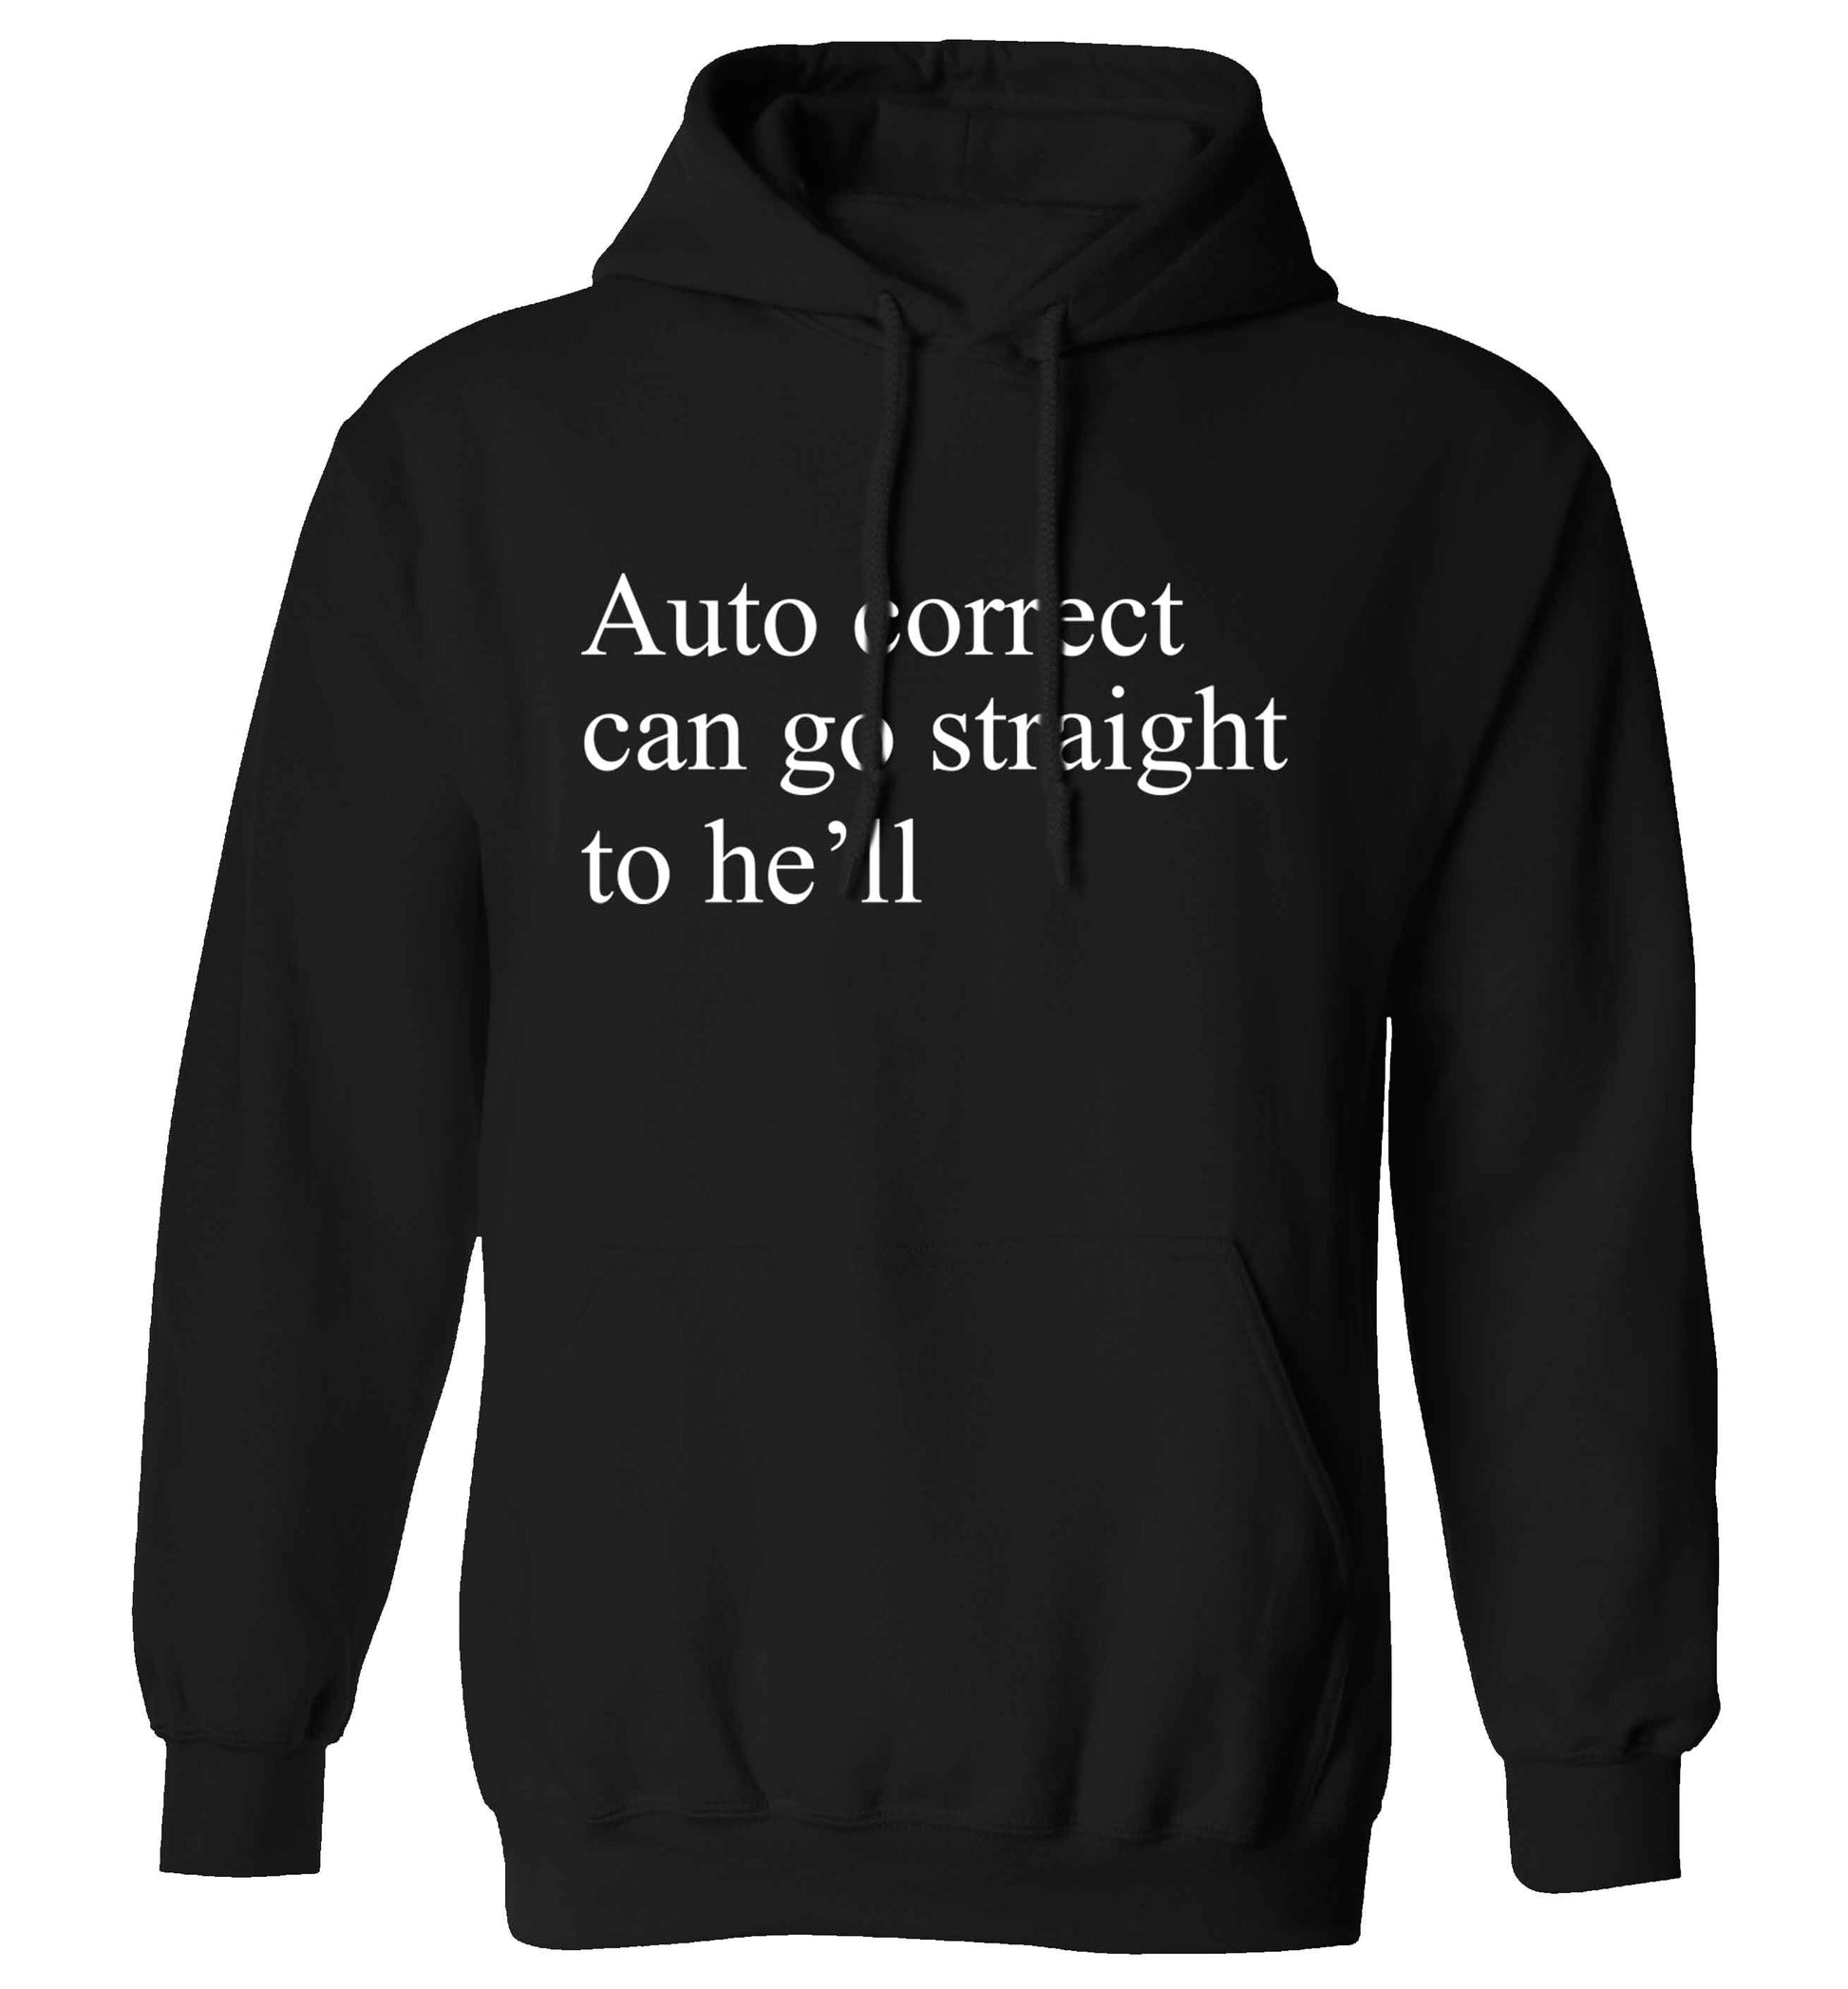 Auto correct can go straight to he'll adults unisex black hoodie 2XL